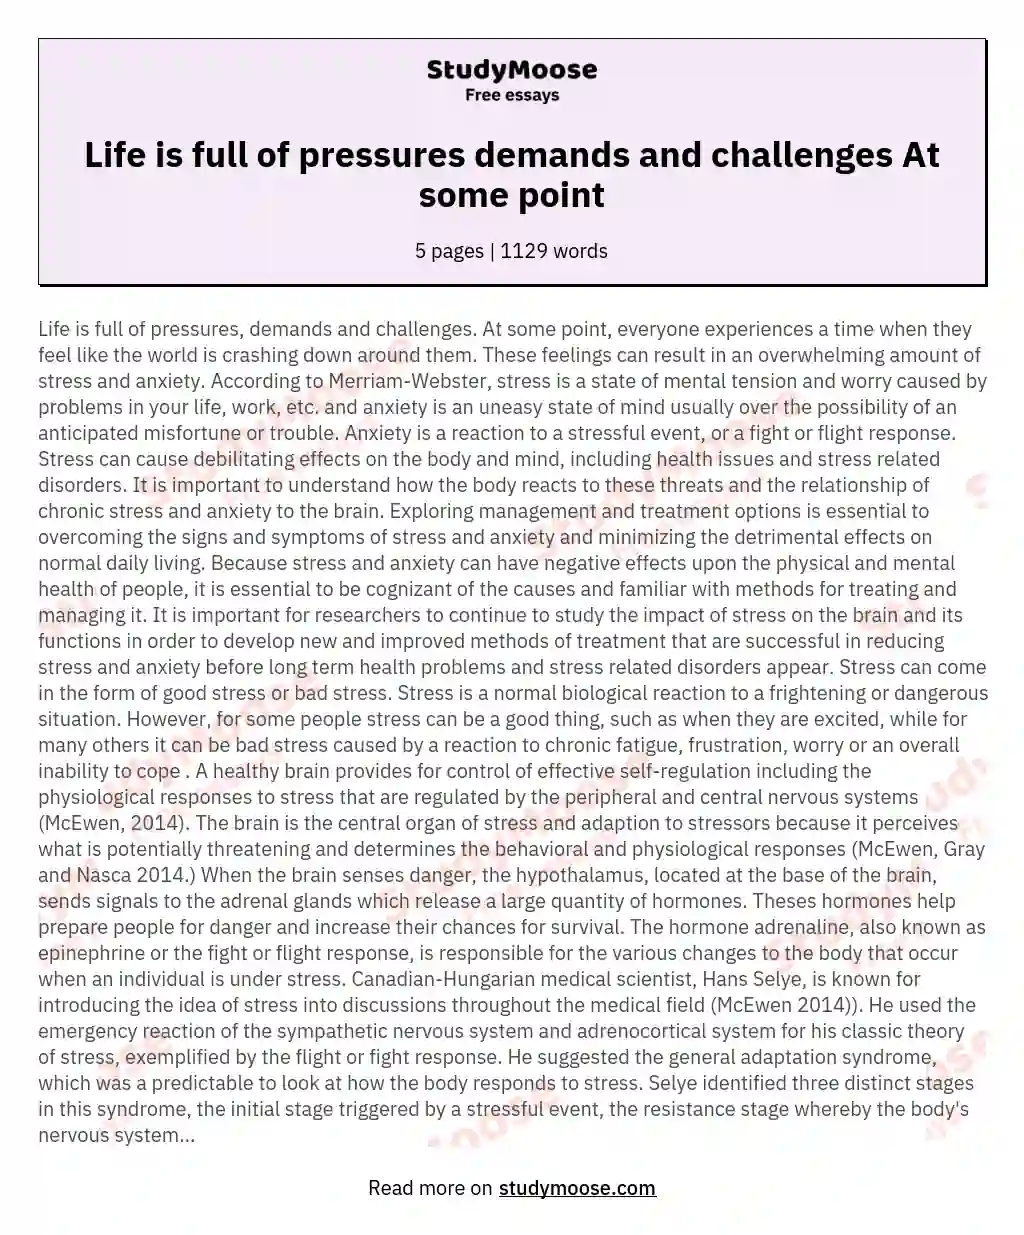 Life is full of pressures demands and challenges At some point essay